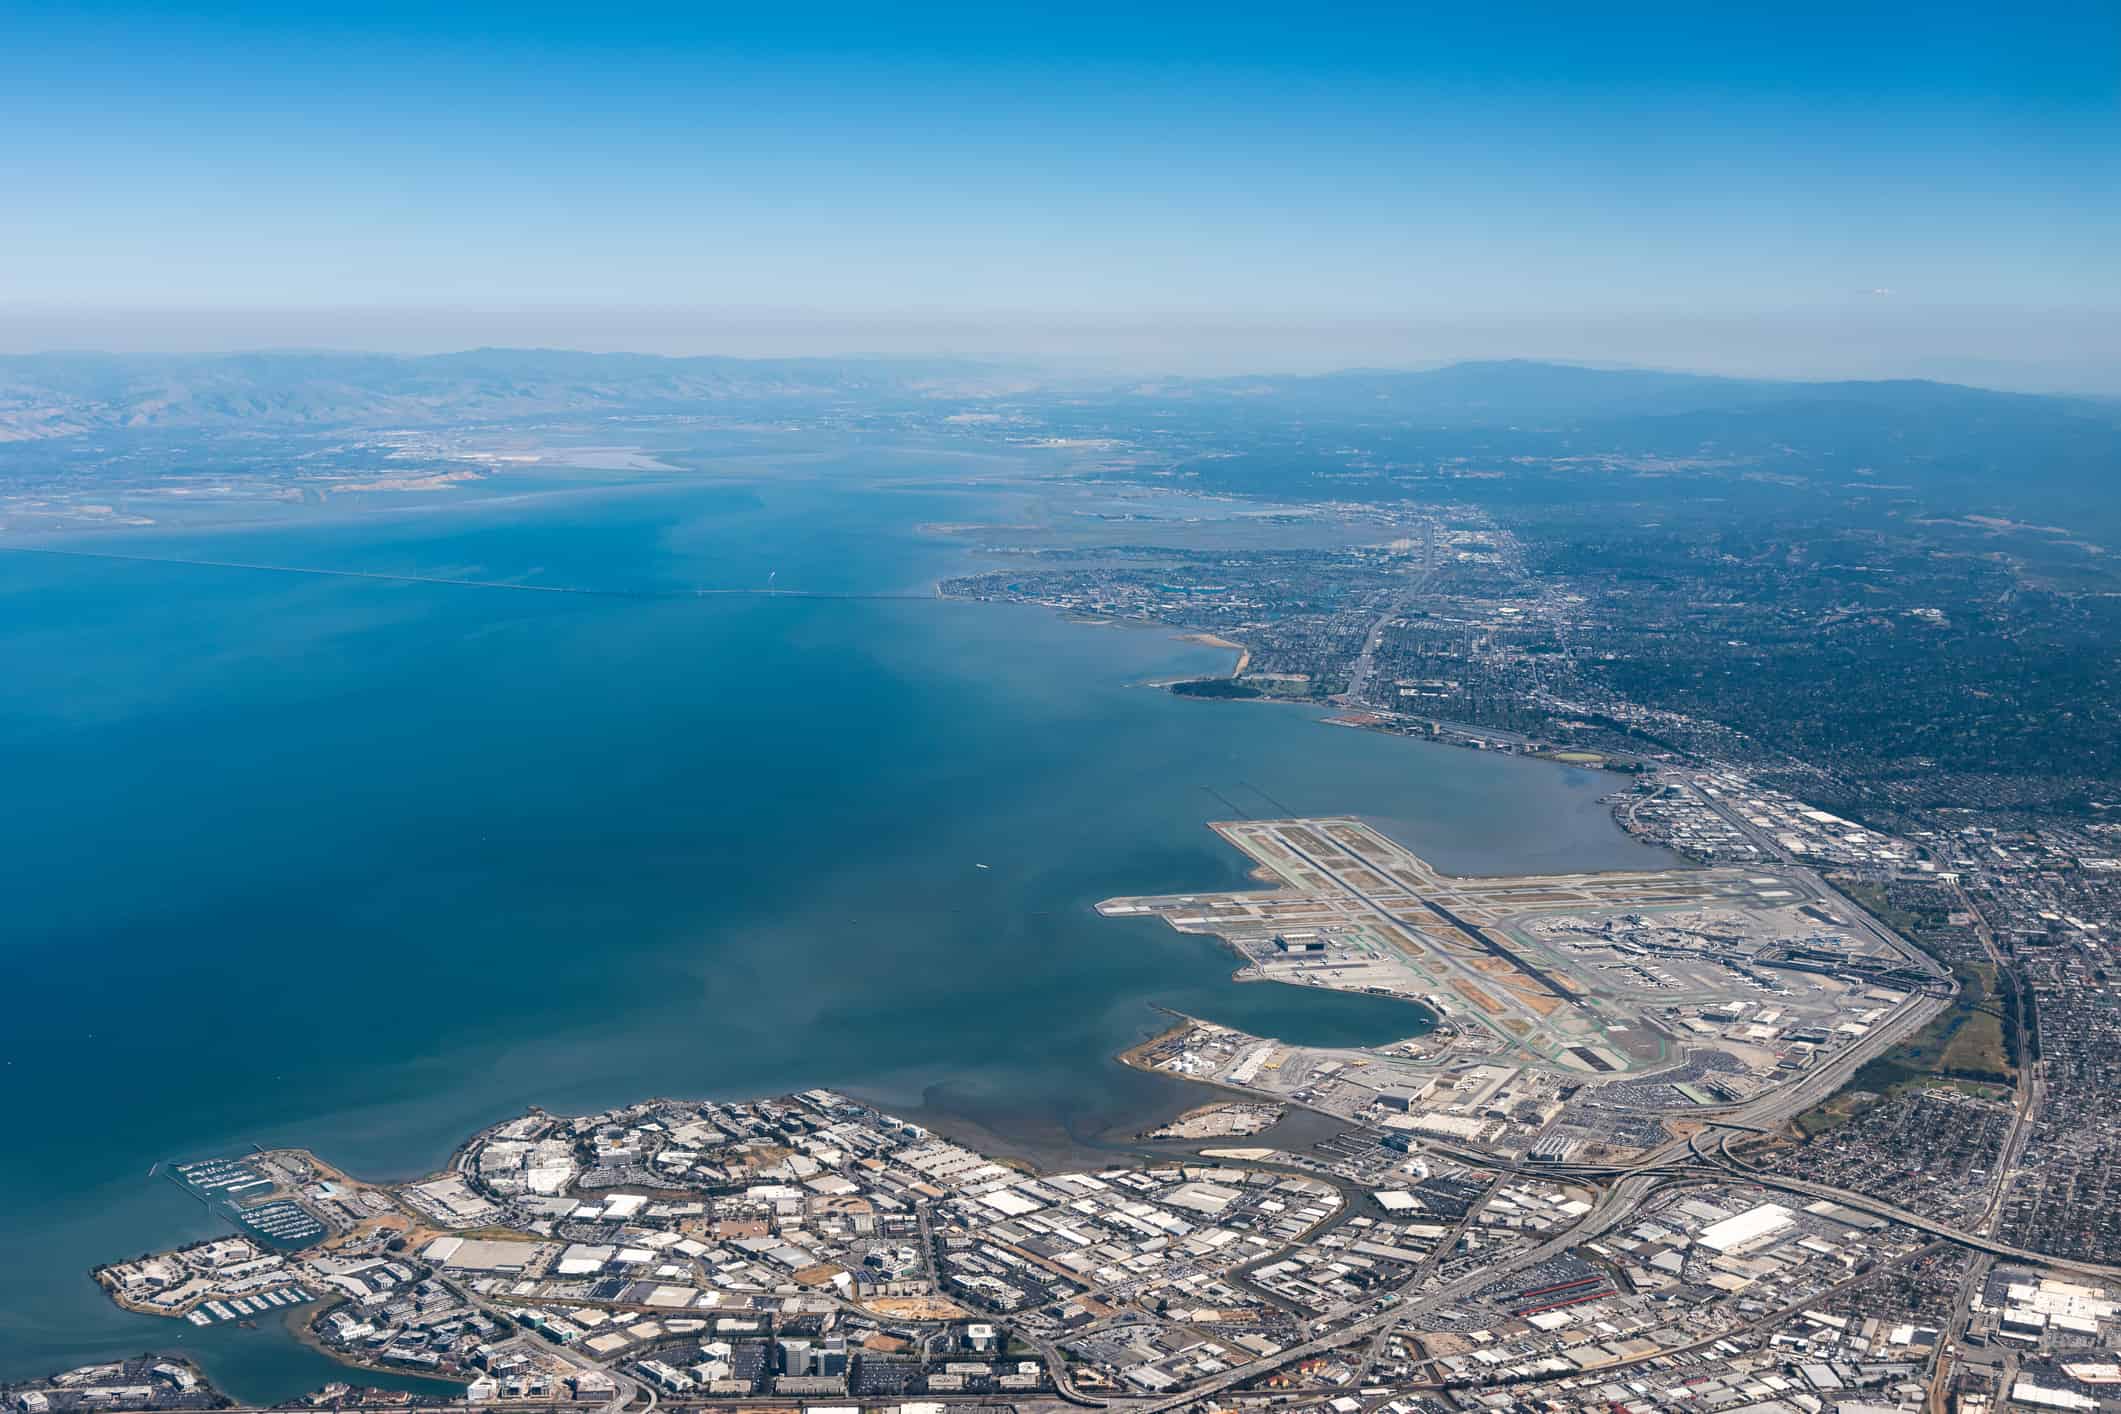 The aerial view of San Francisco Bay in California, USA